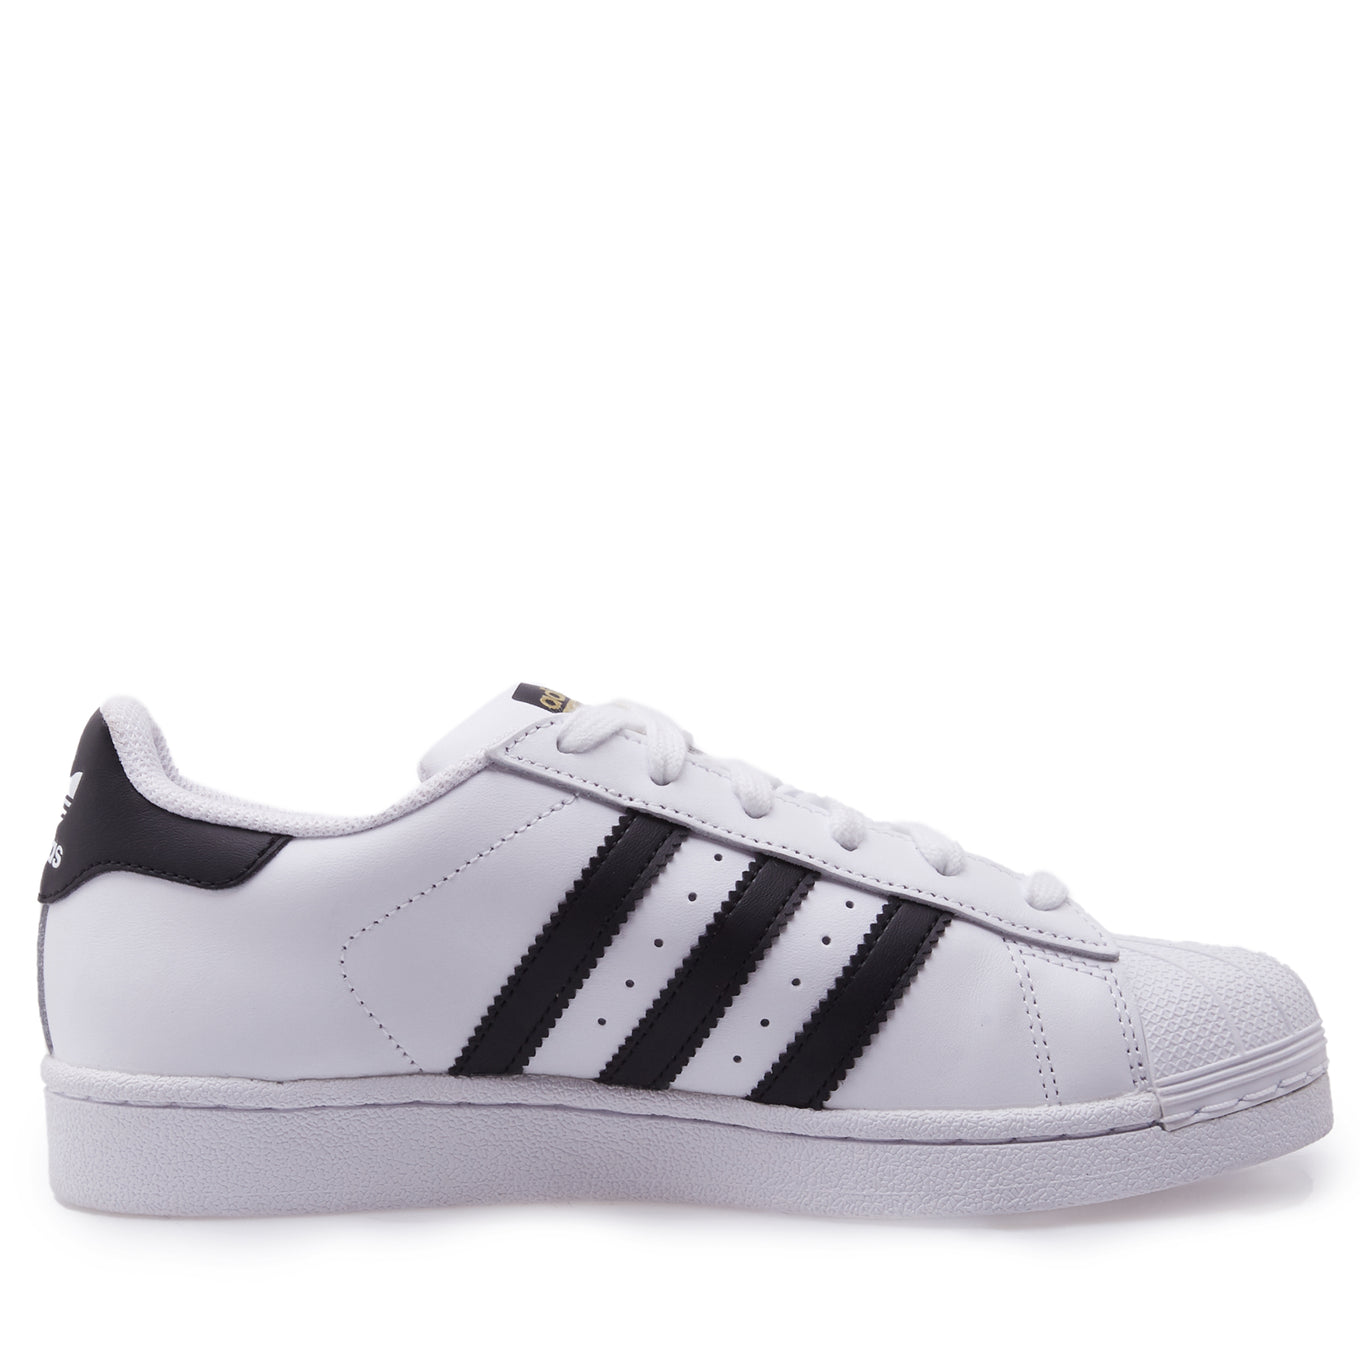 Adidas Superstar Made In Indonesia